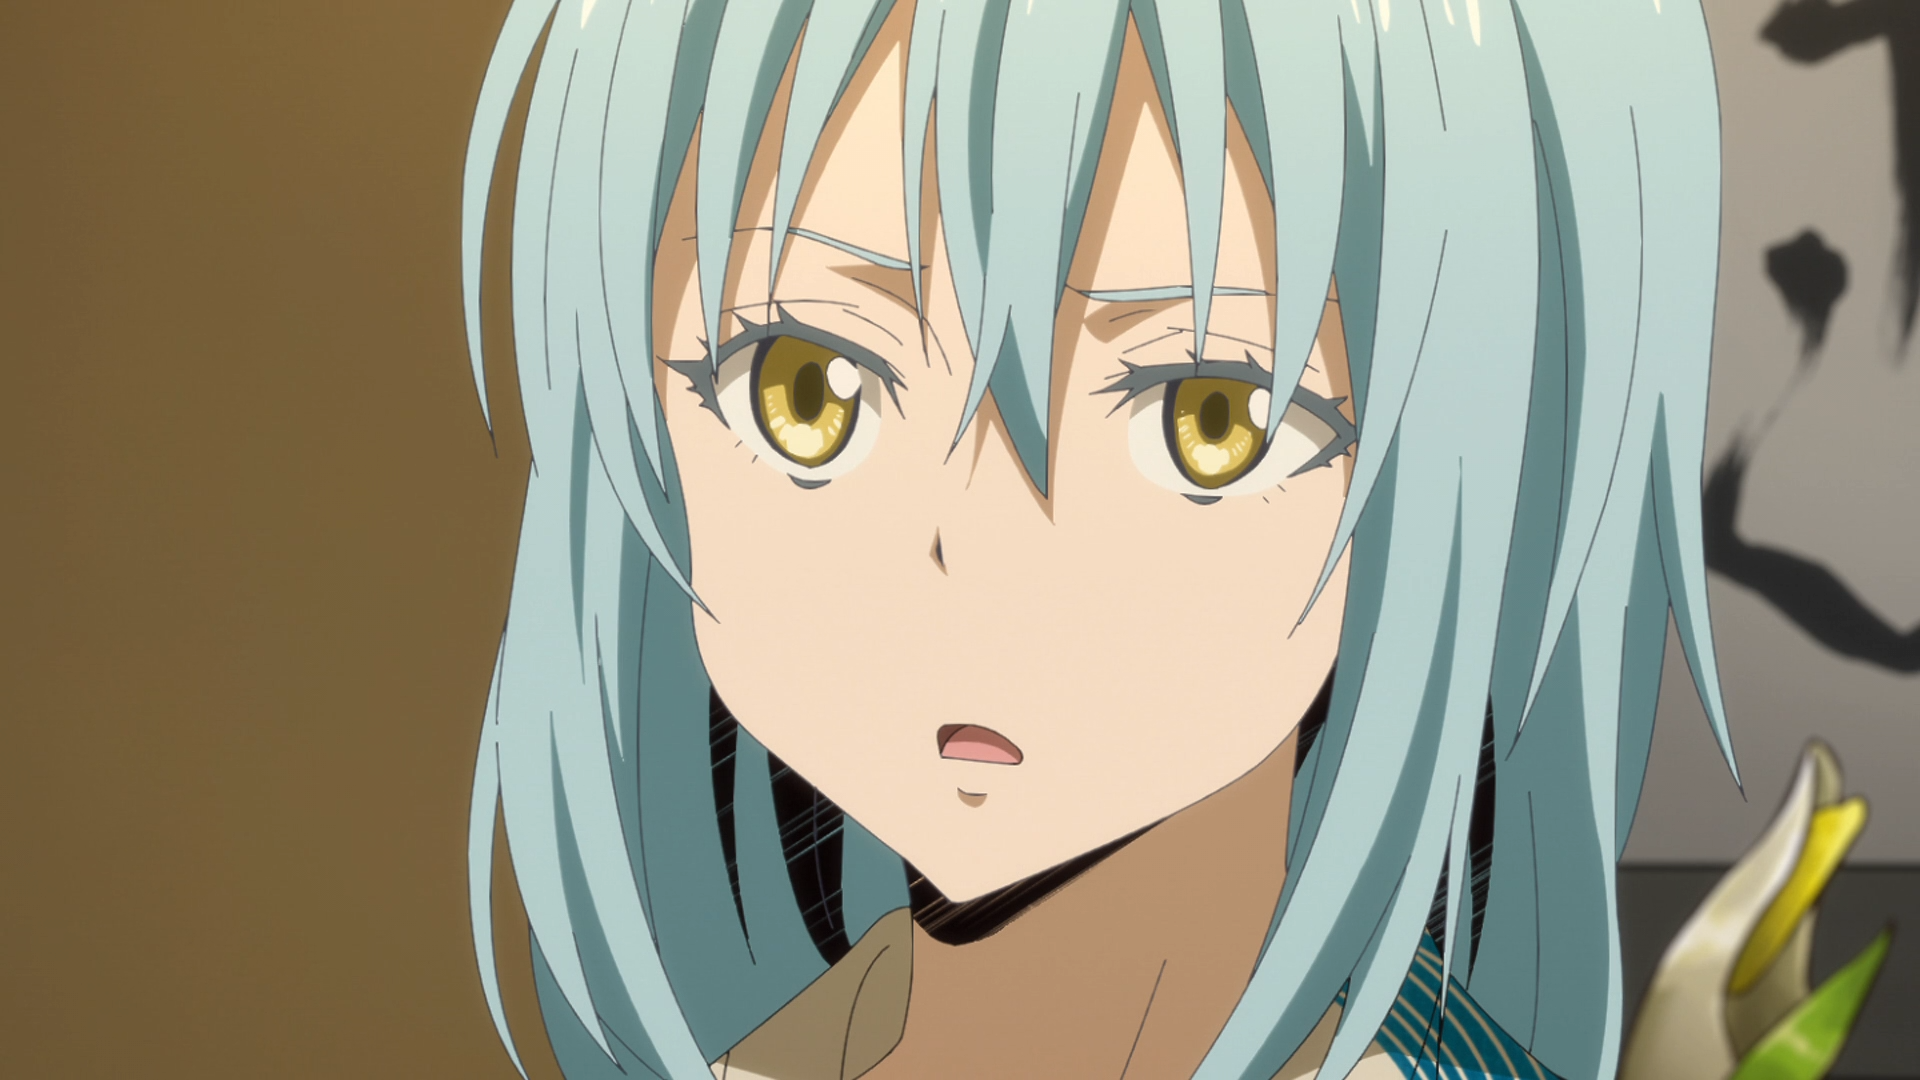 That Time I Got Reincarnated as a Slime episode 41 release date